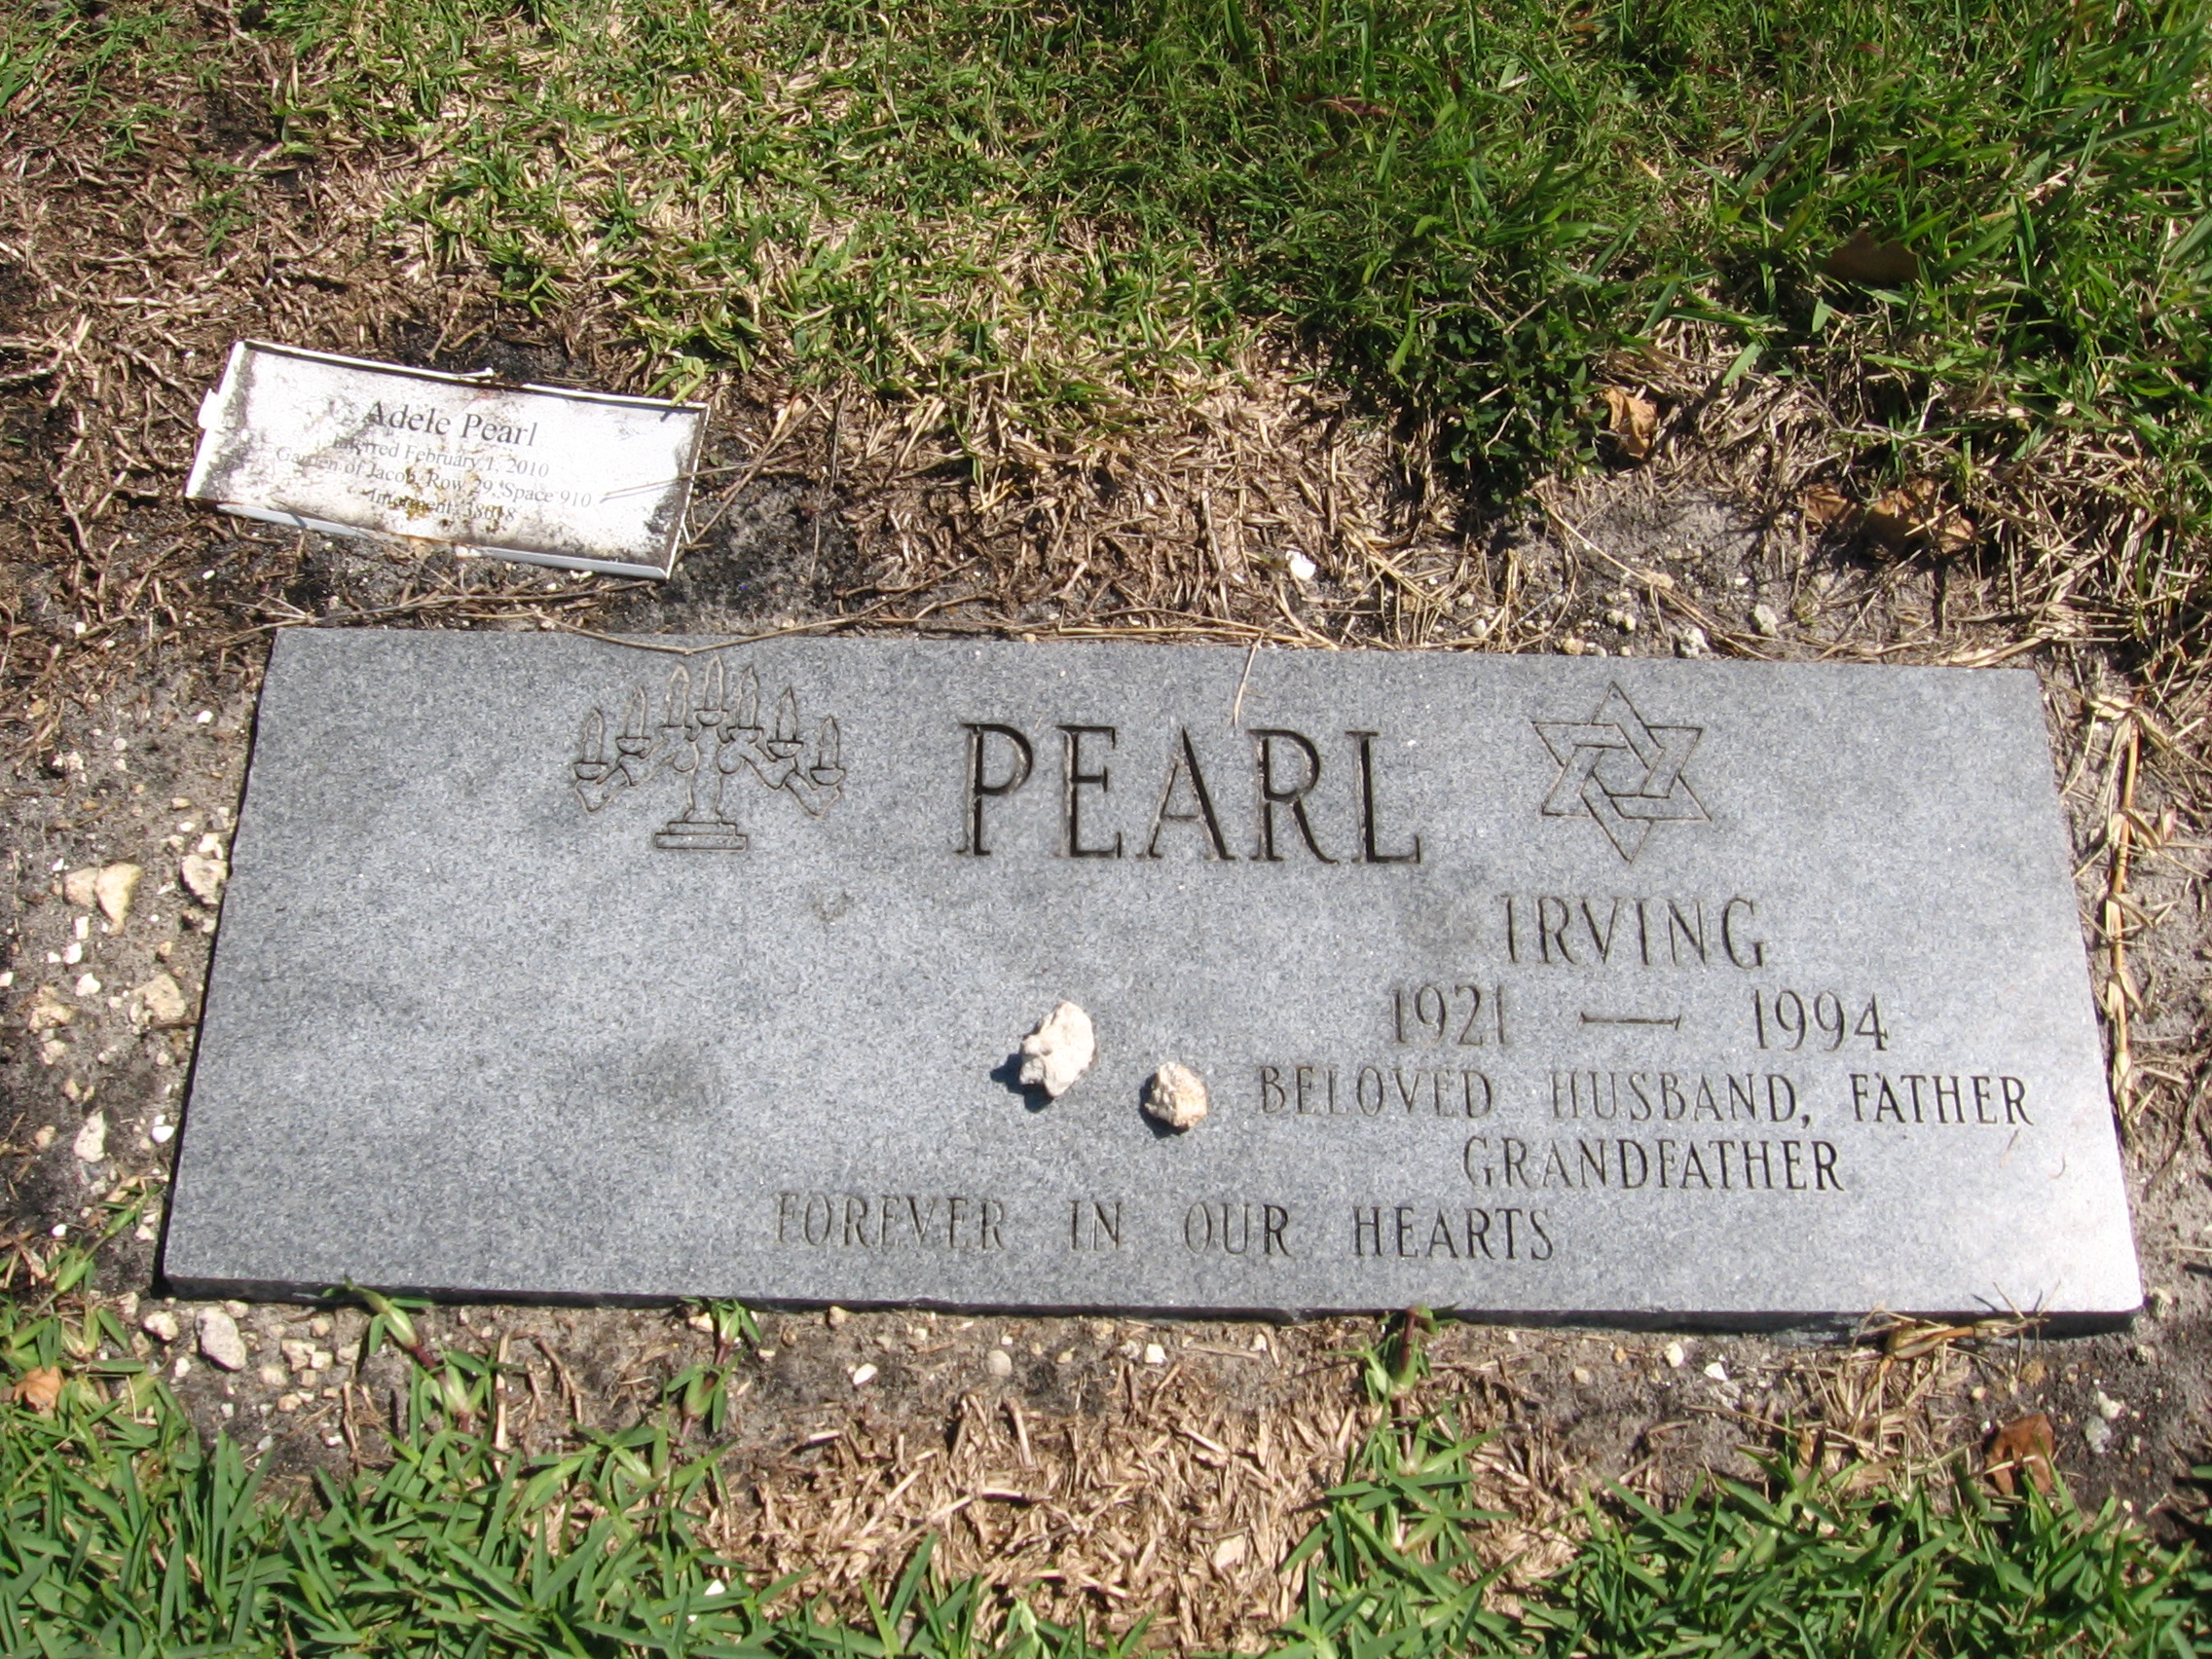 Irving Pearl